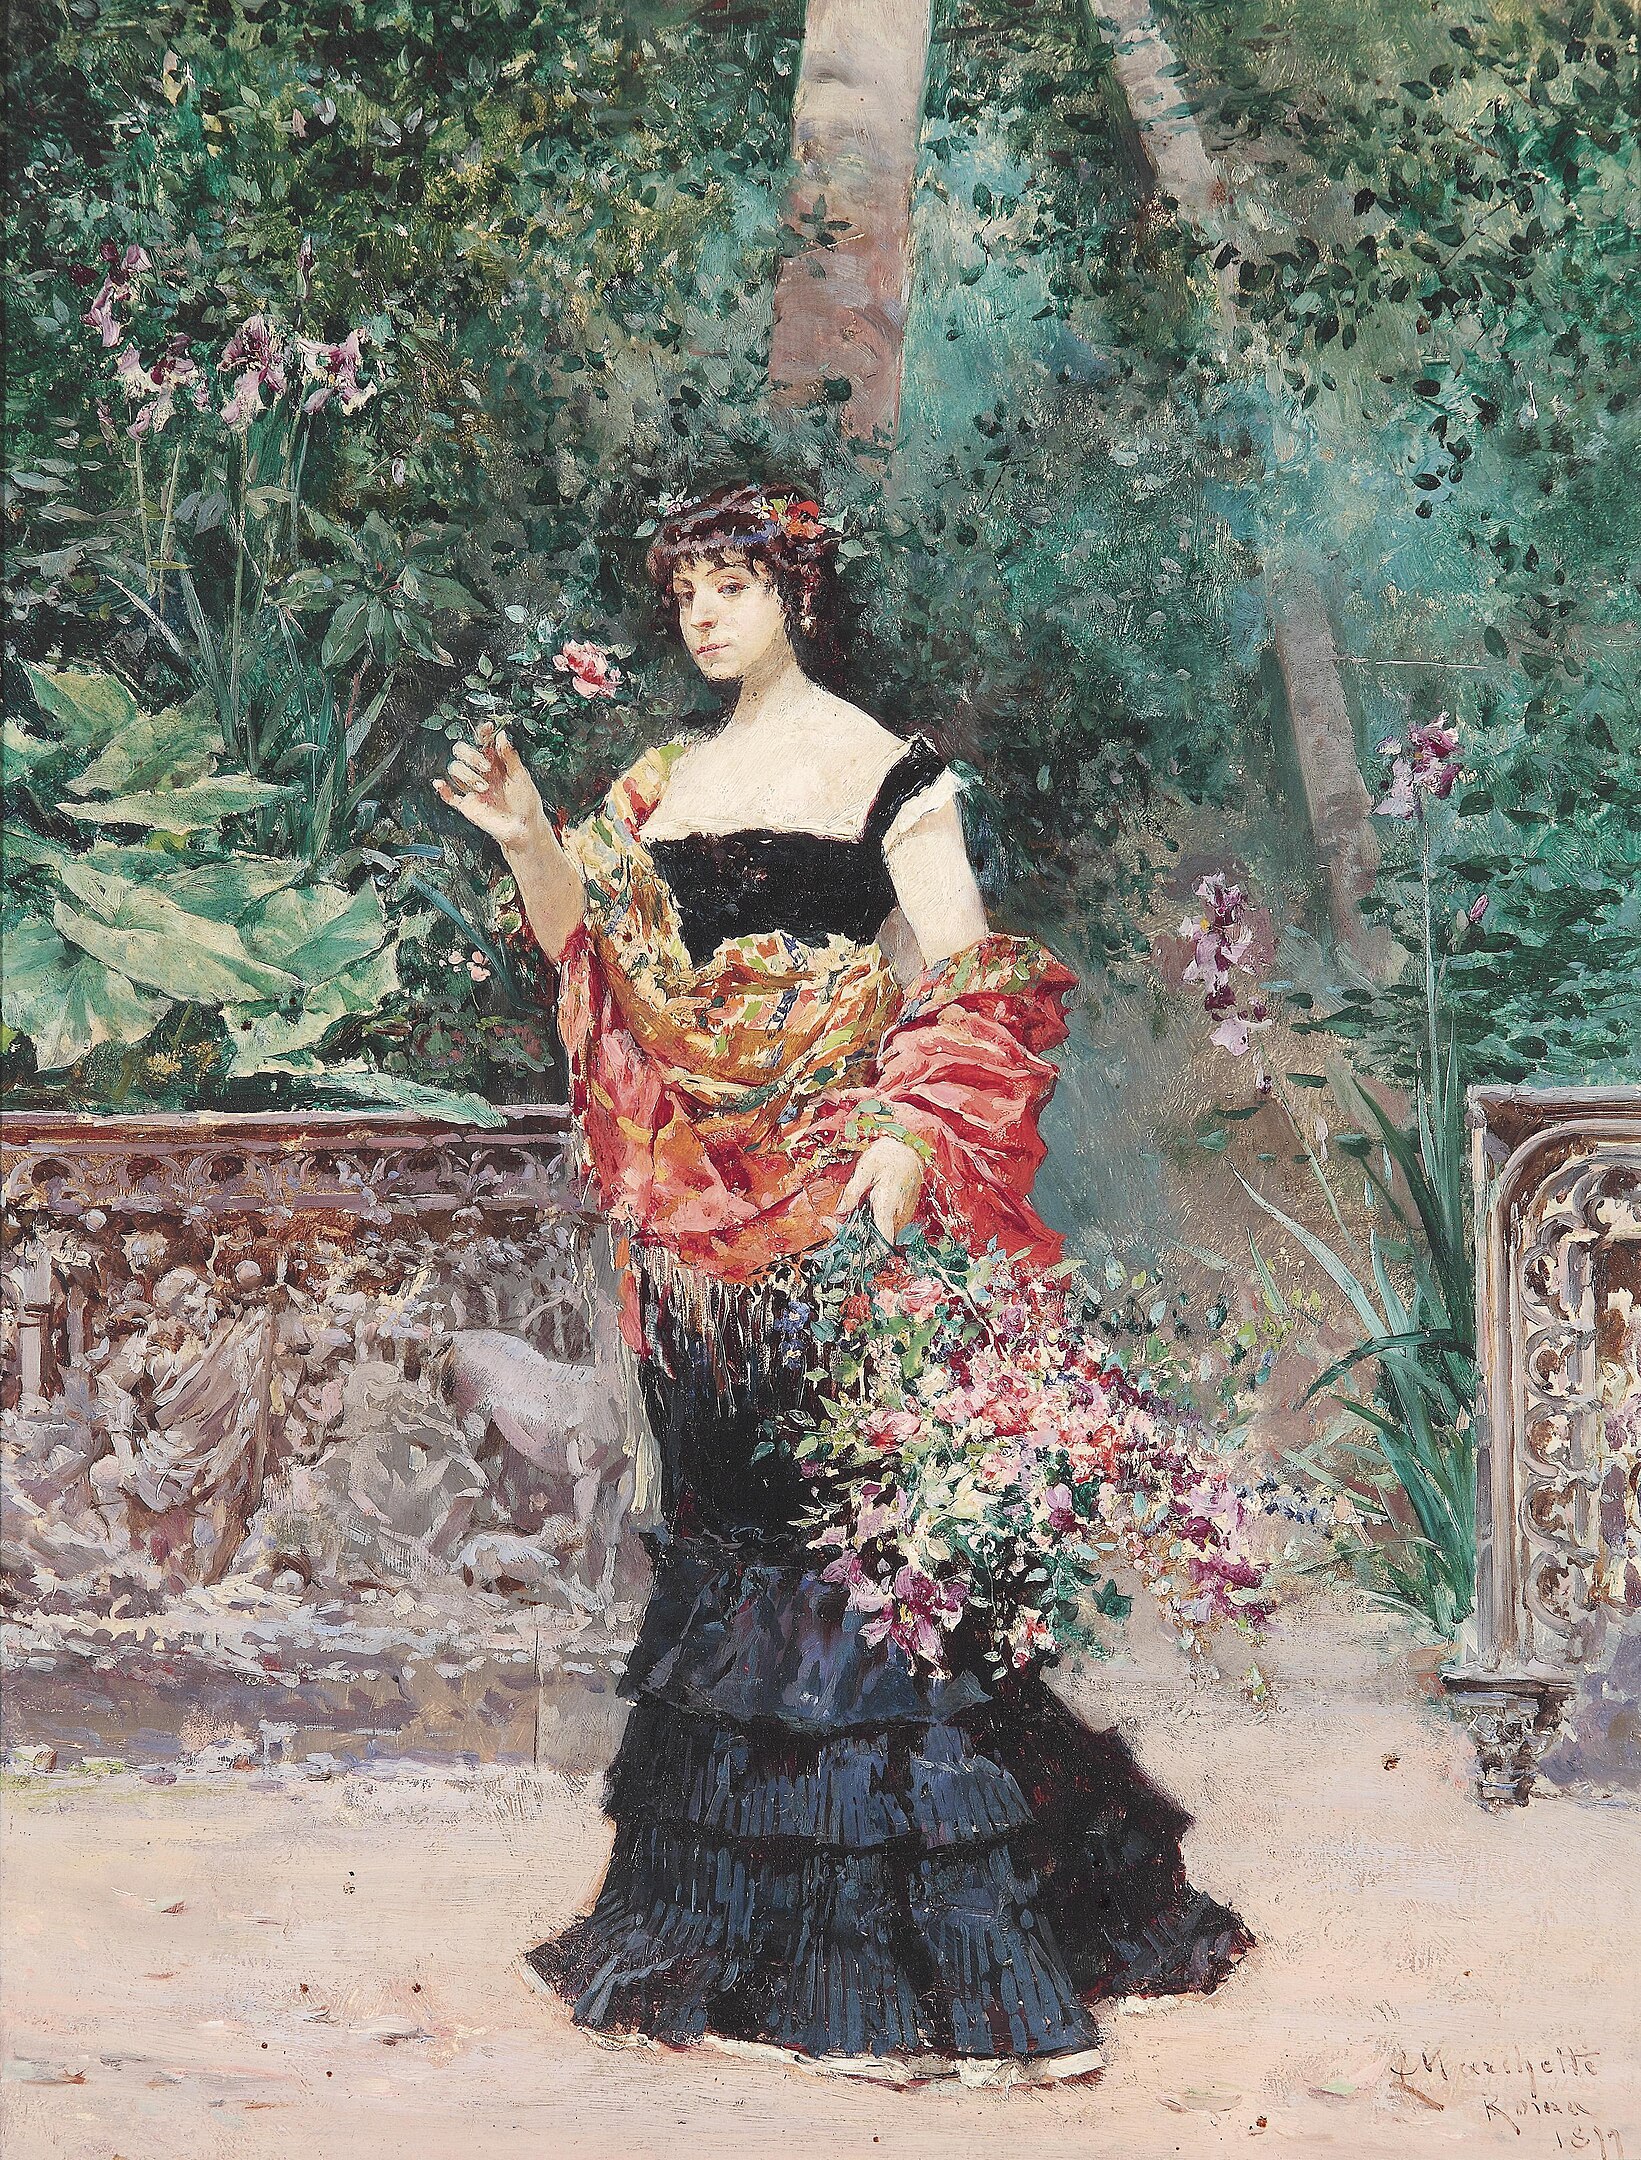 A full-body portrait of a woman in a dress holding a flower at a park